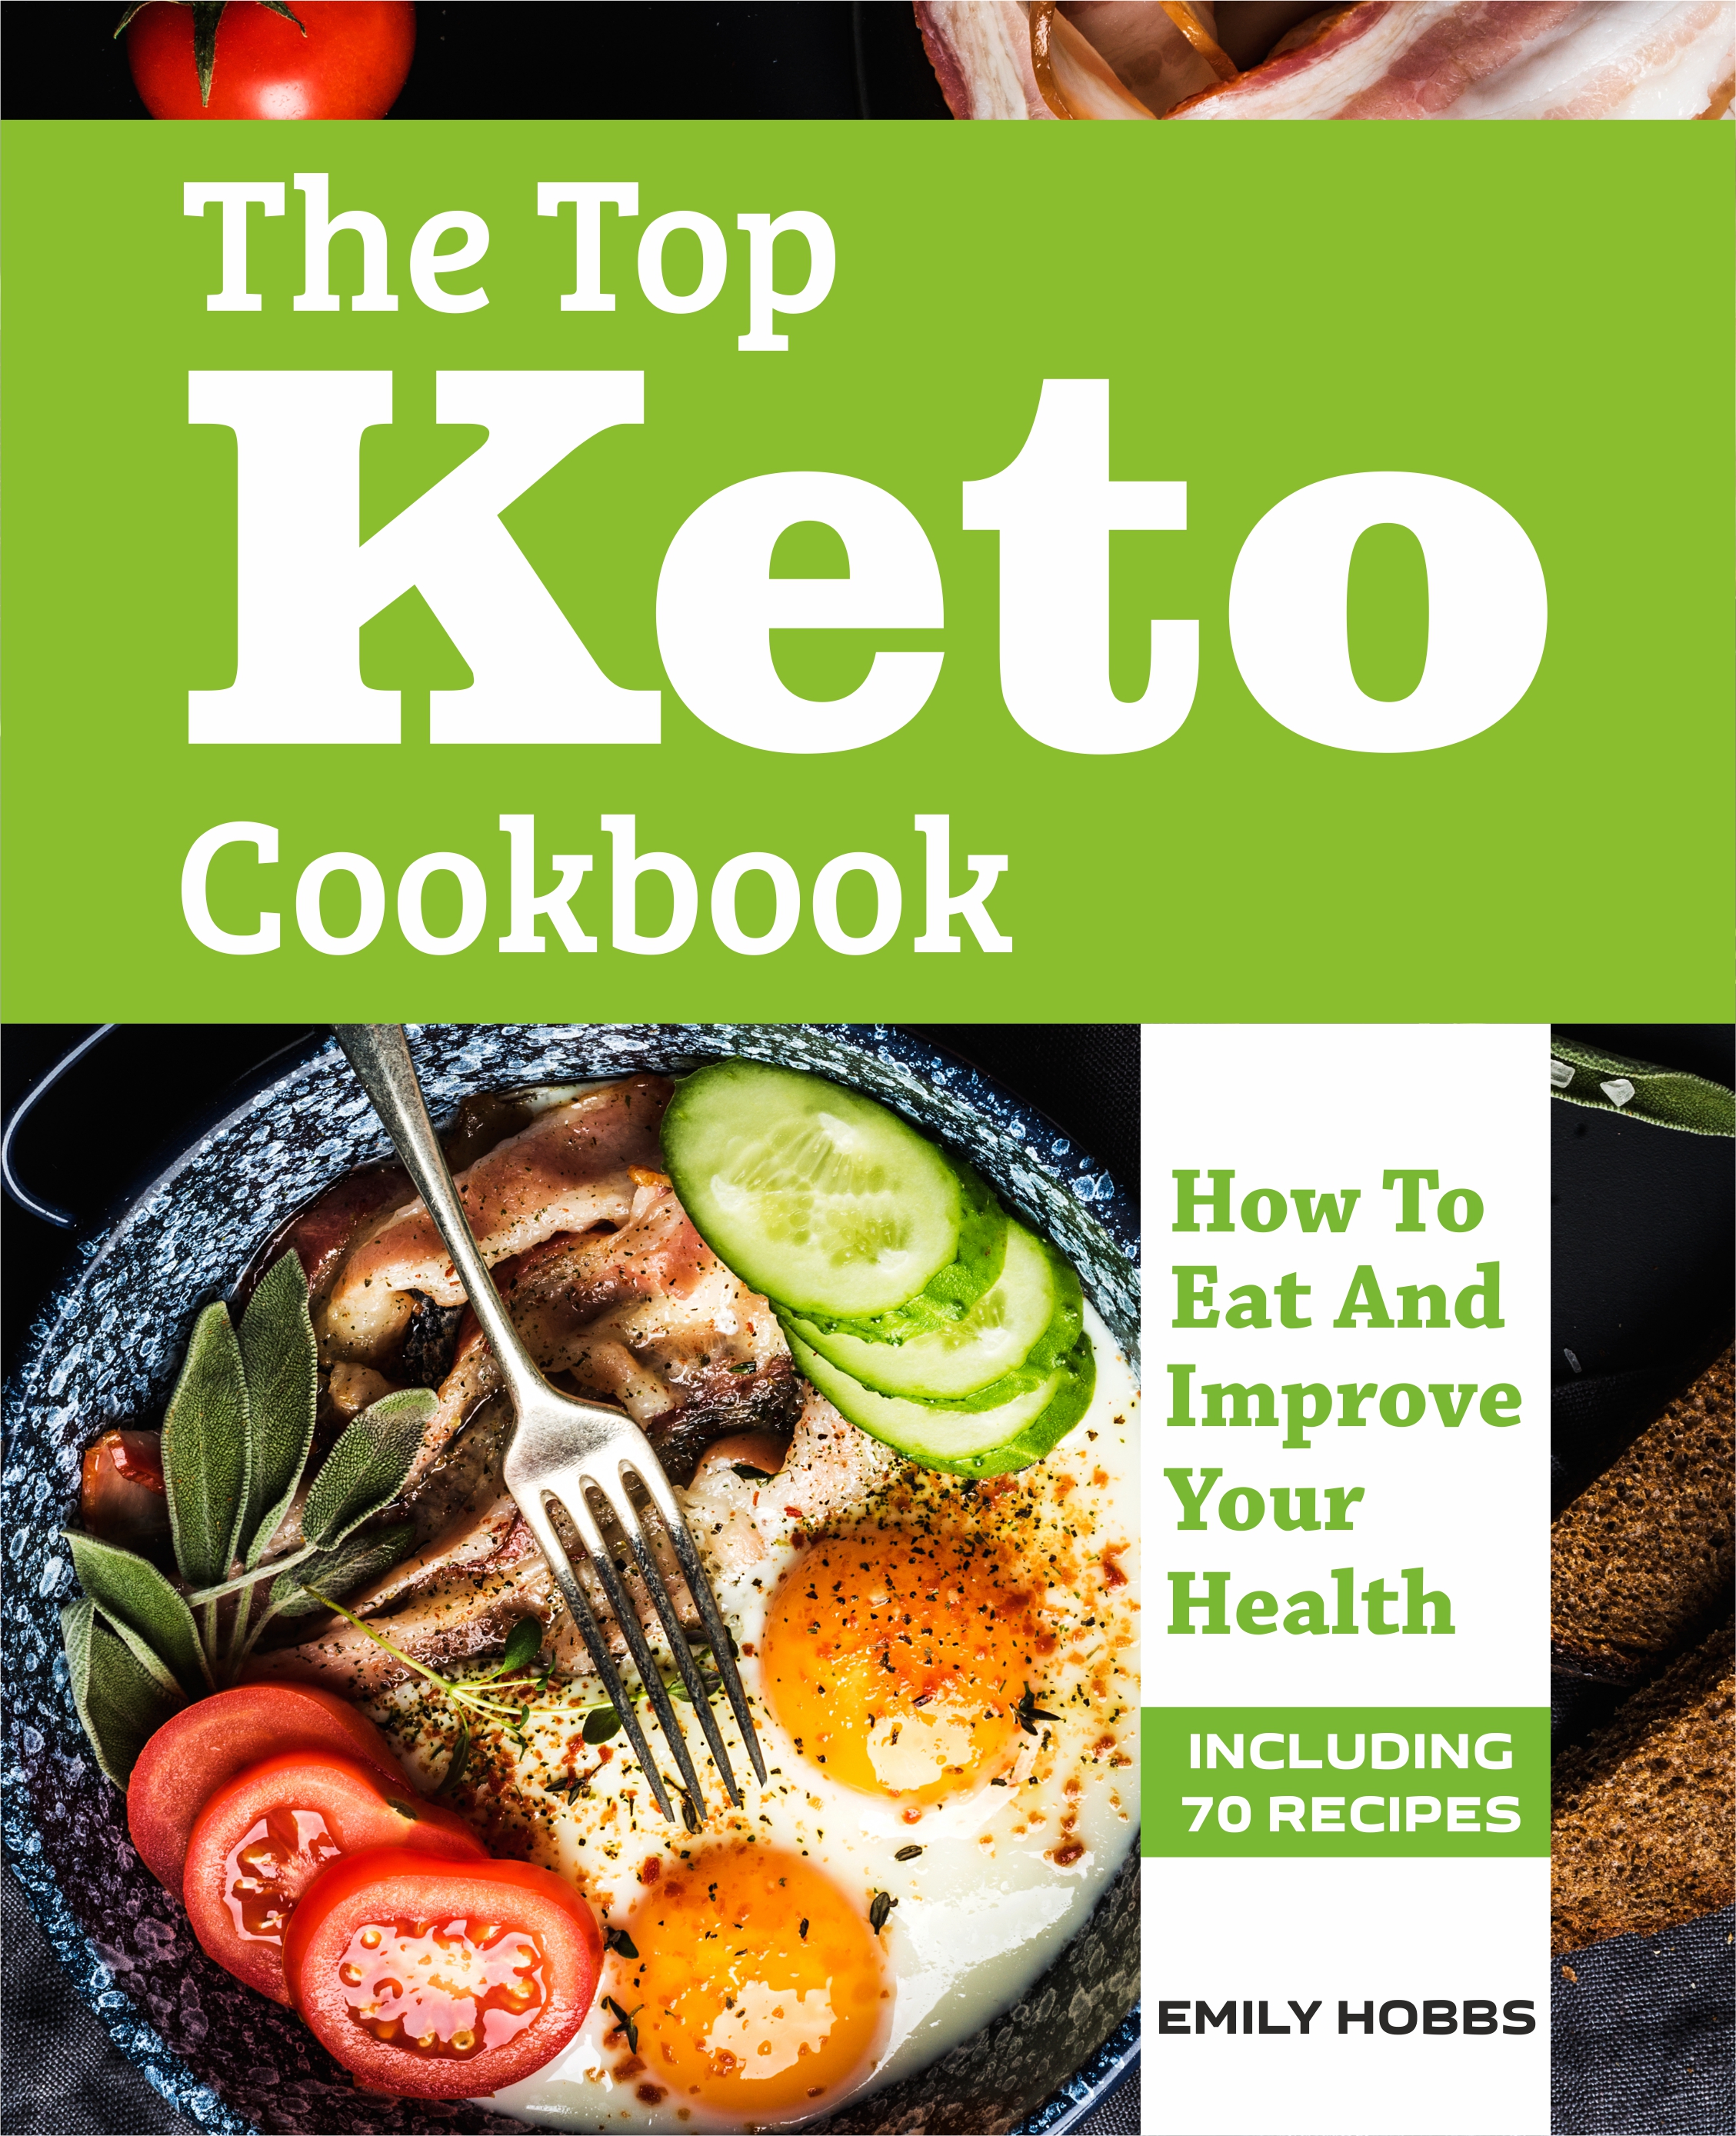 FREE: The Top Keto Cookbook: How To Eat And Improve Your Health by Emily Hobbs by Emily Hobbs